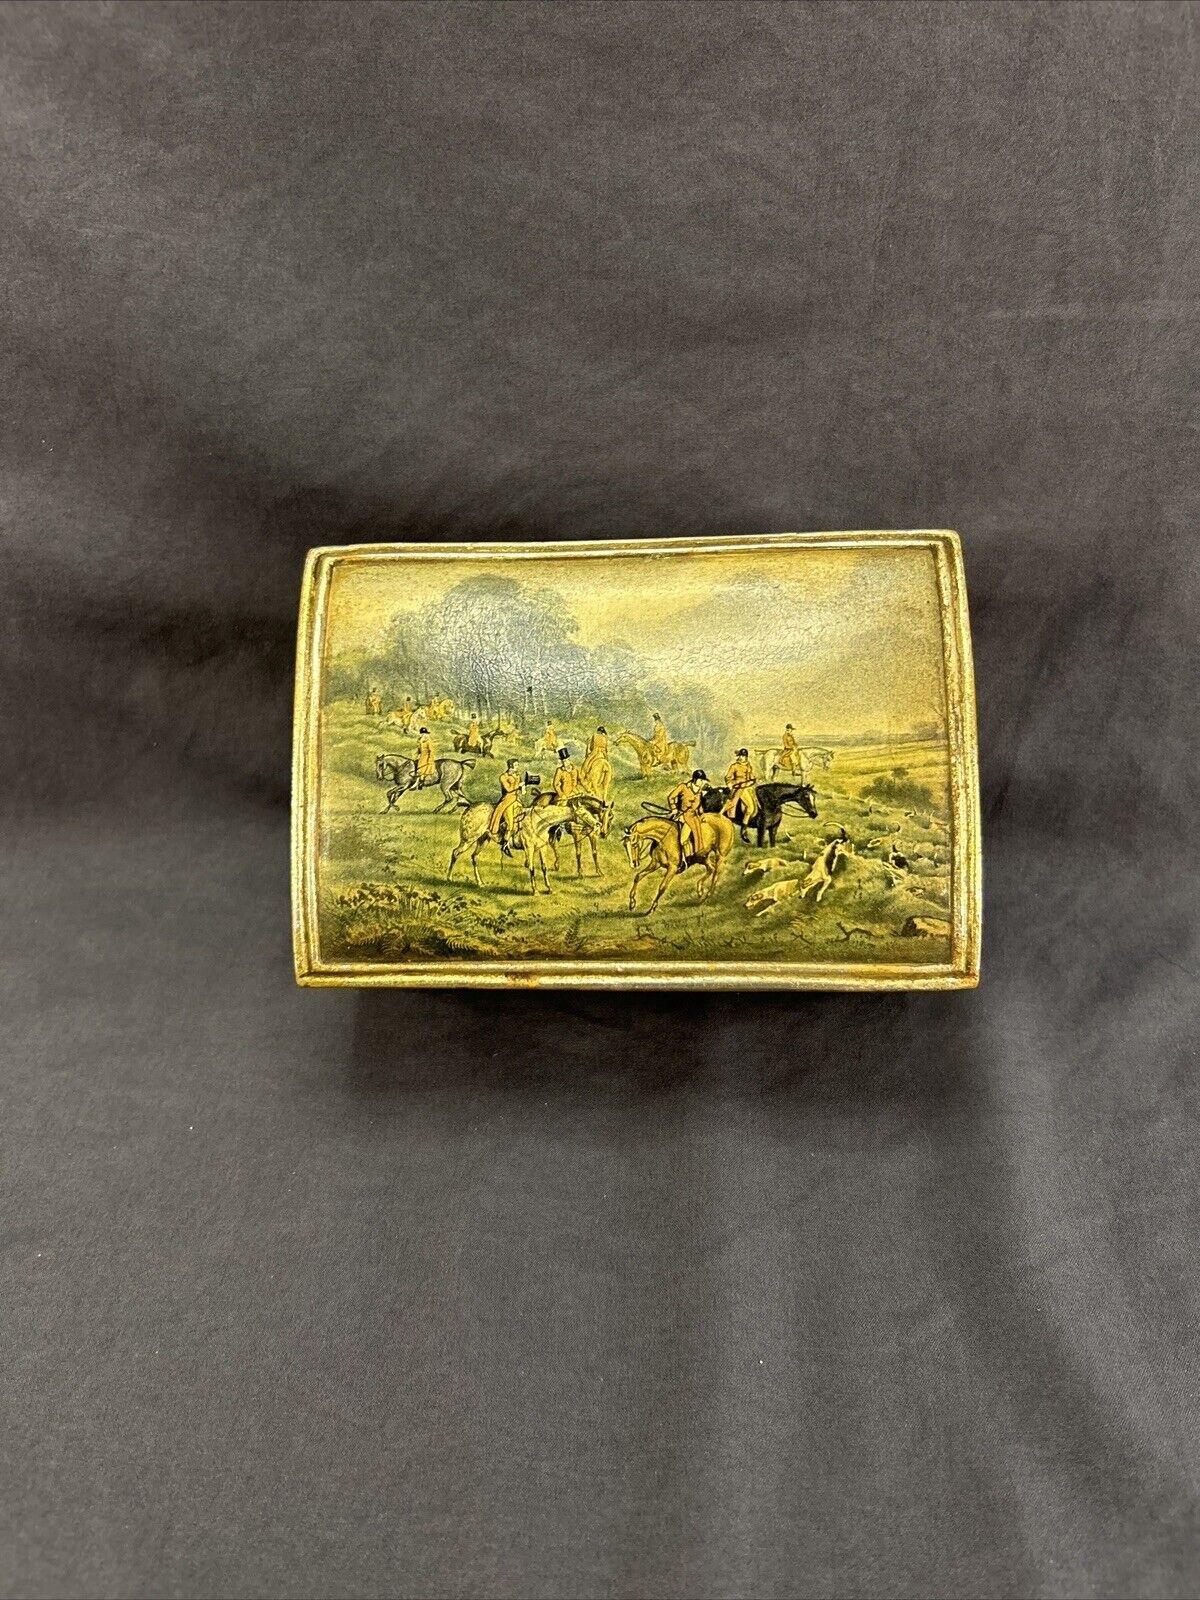 Borghese trinket box sale dresser fox hunt gift vintage wooden collect jewelry